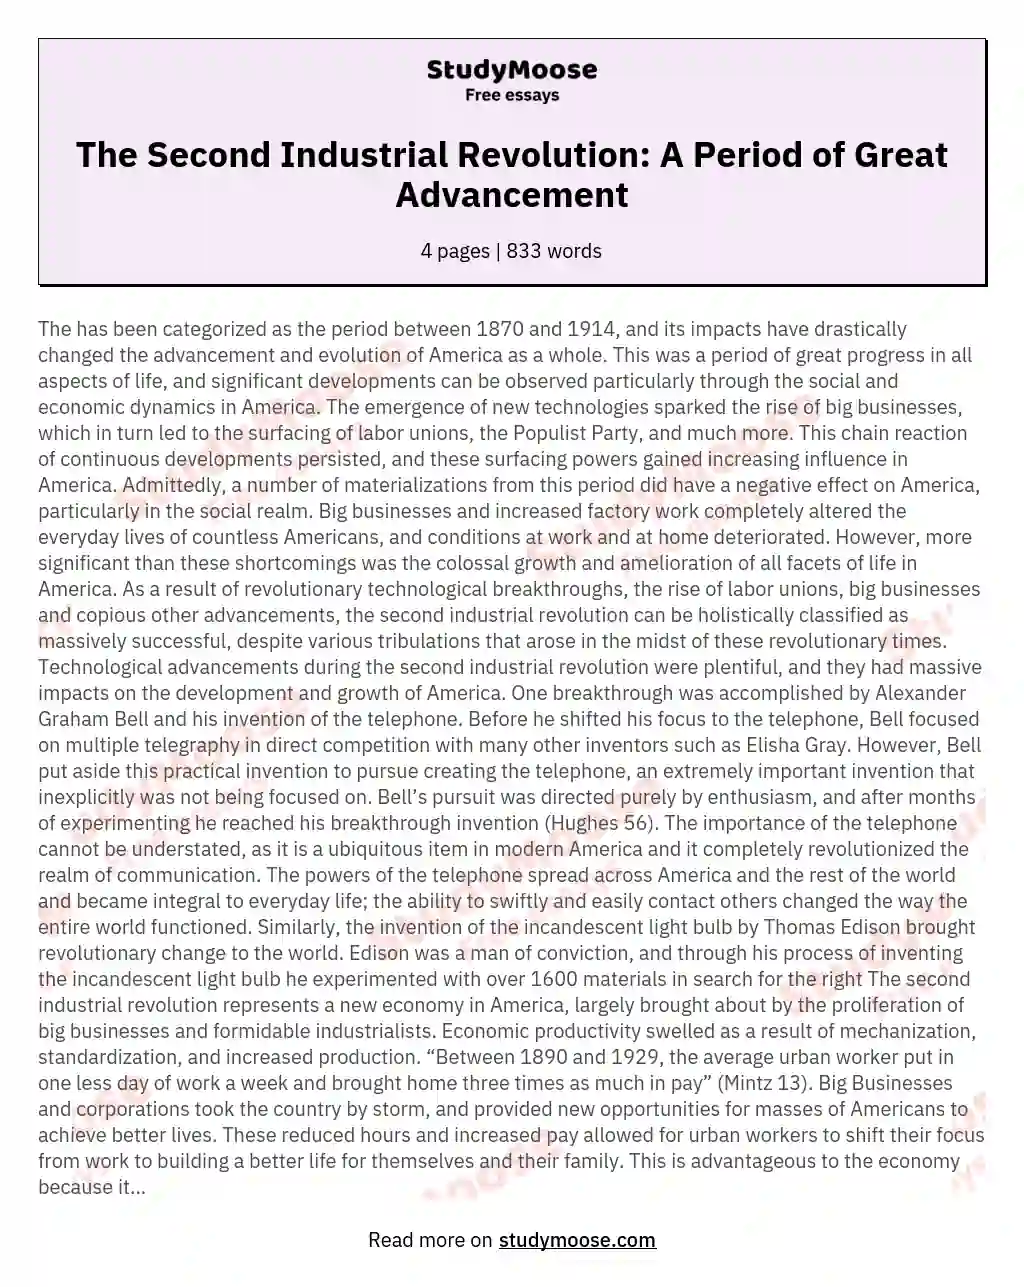 The Second Industrial Revolution: A Period of Great Advancement essay